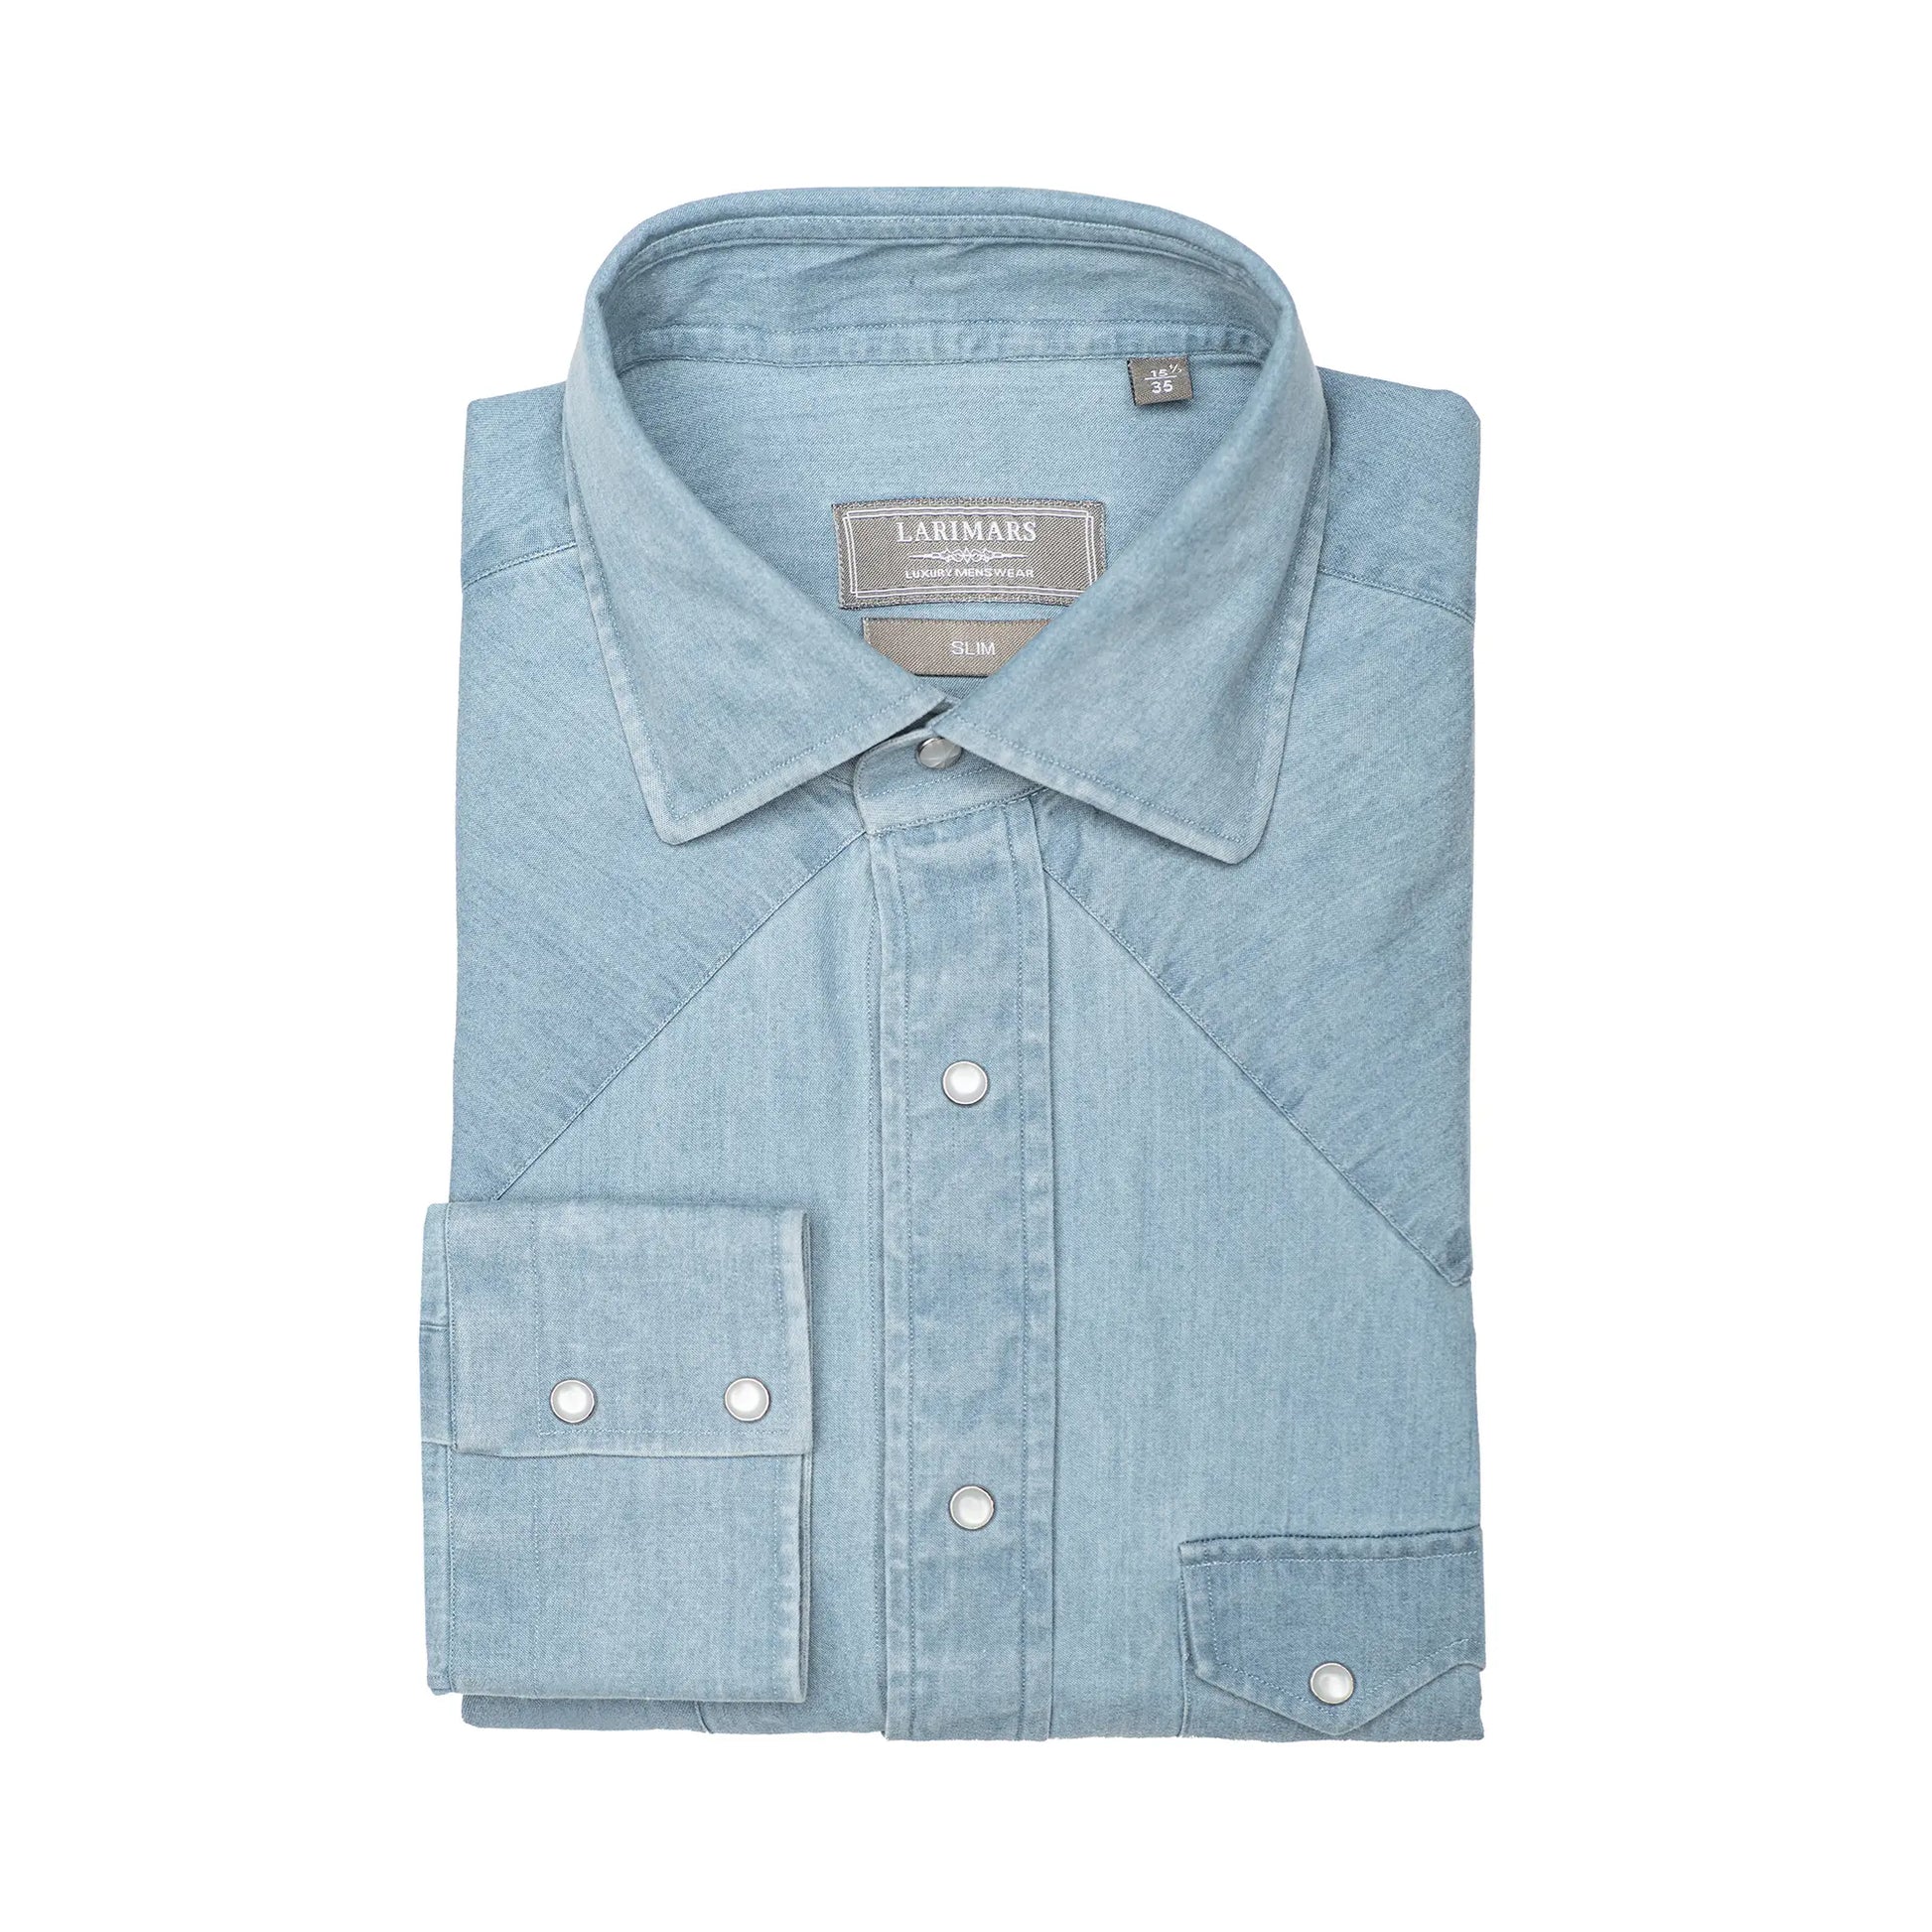 Ice Wash - Western Style Denim - Larimars Clothing Men's Formal and casual wear shirts